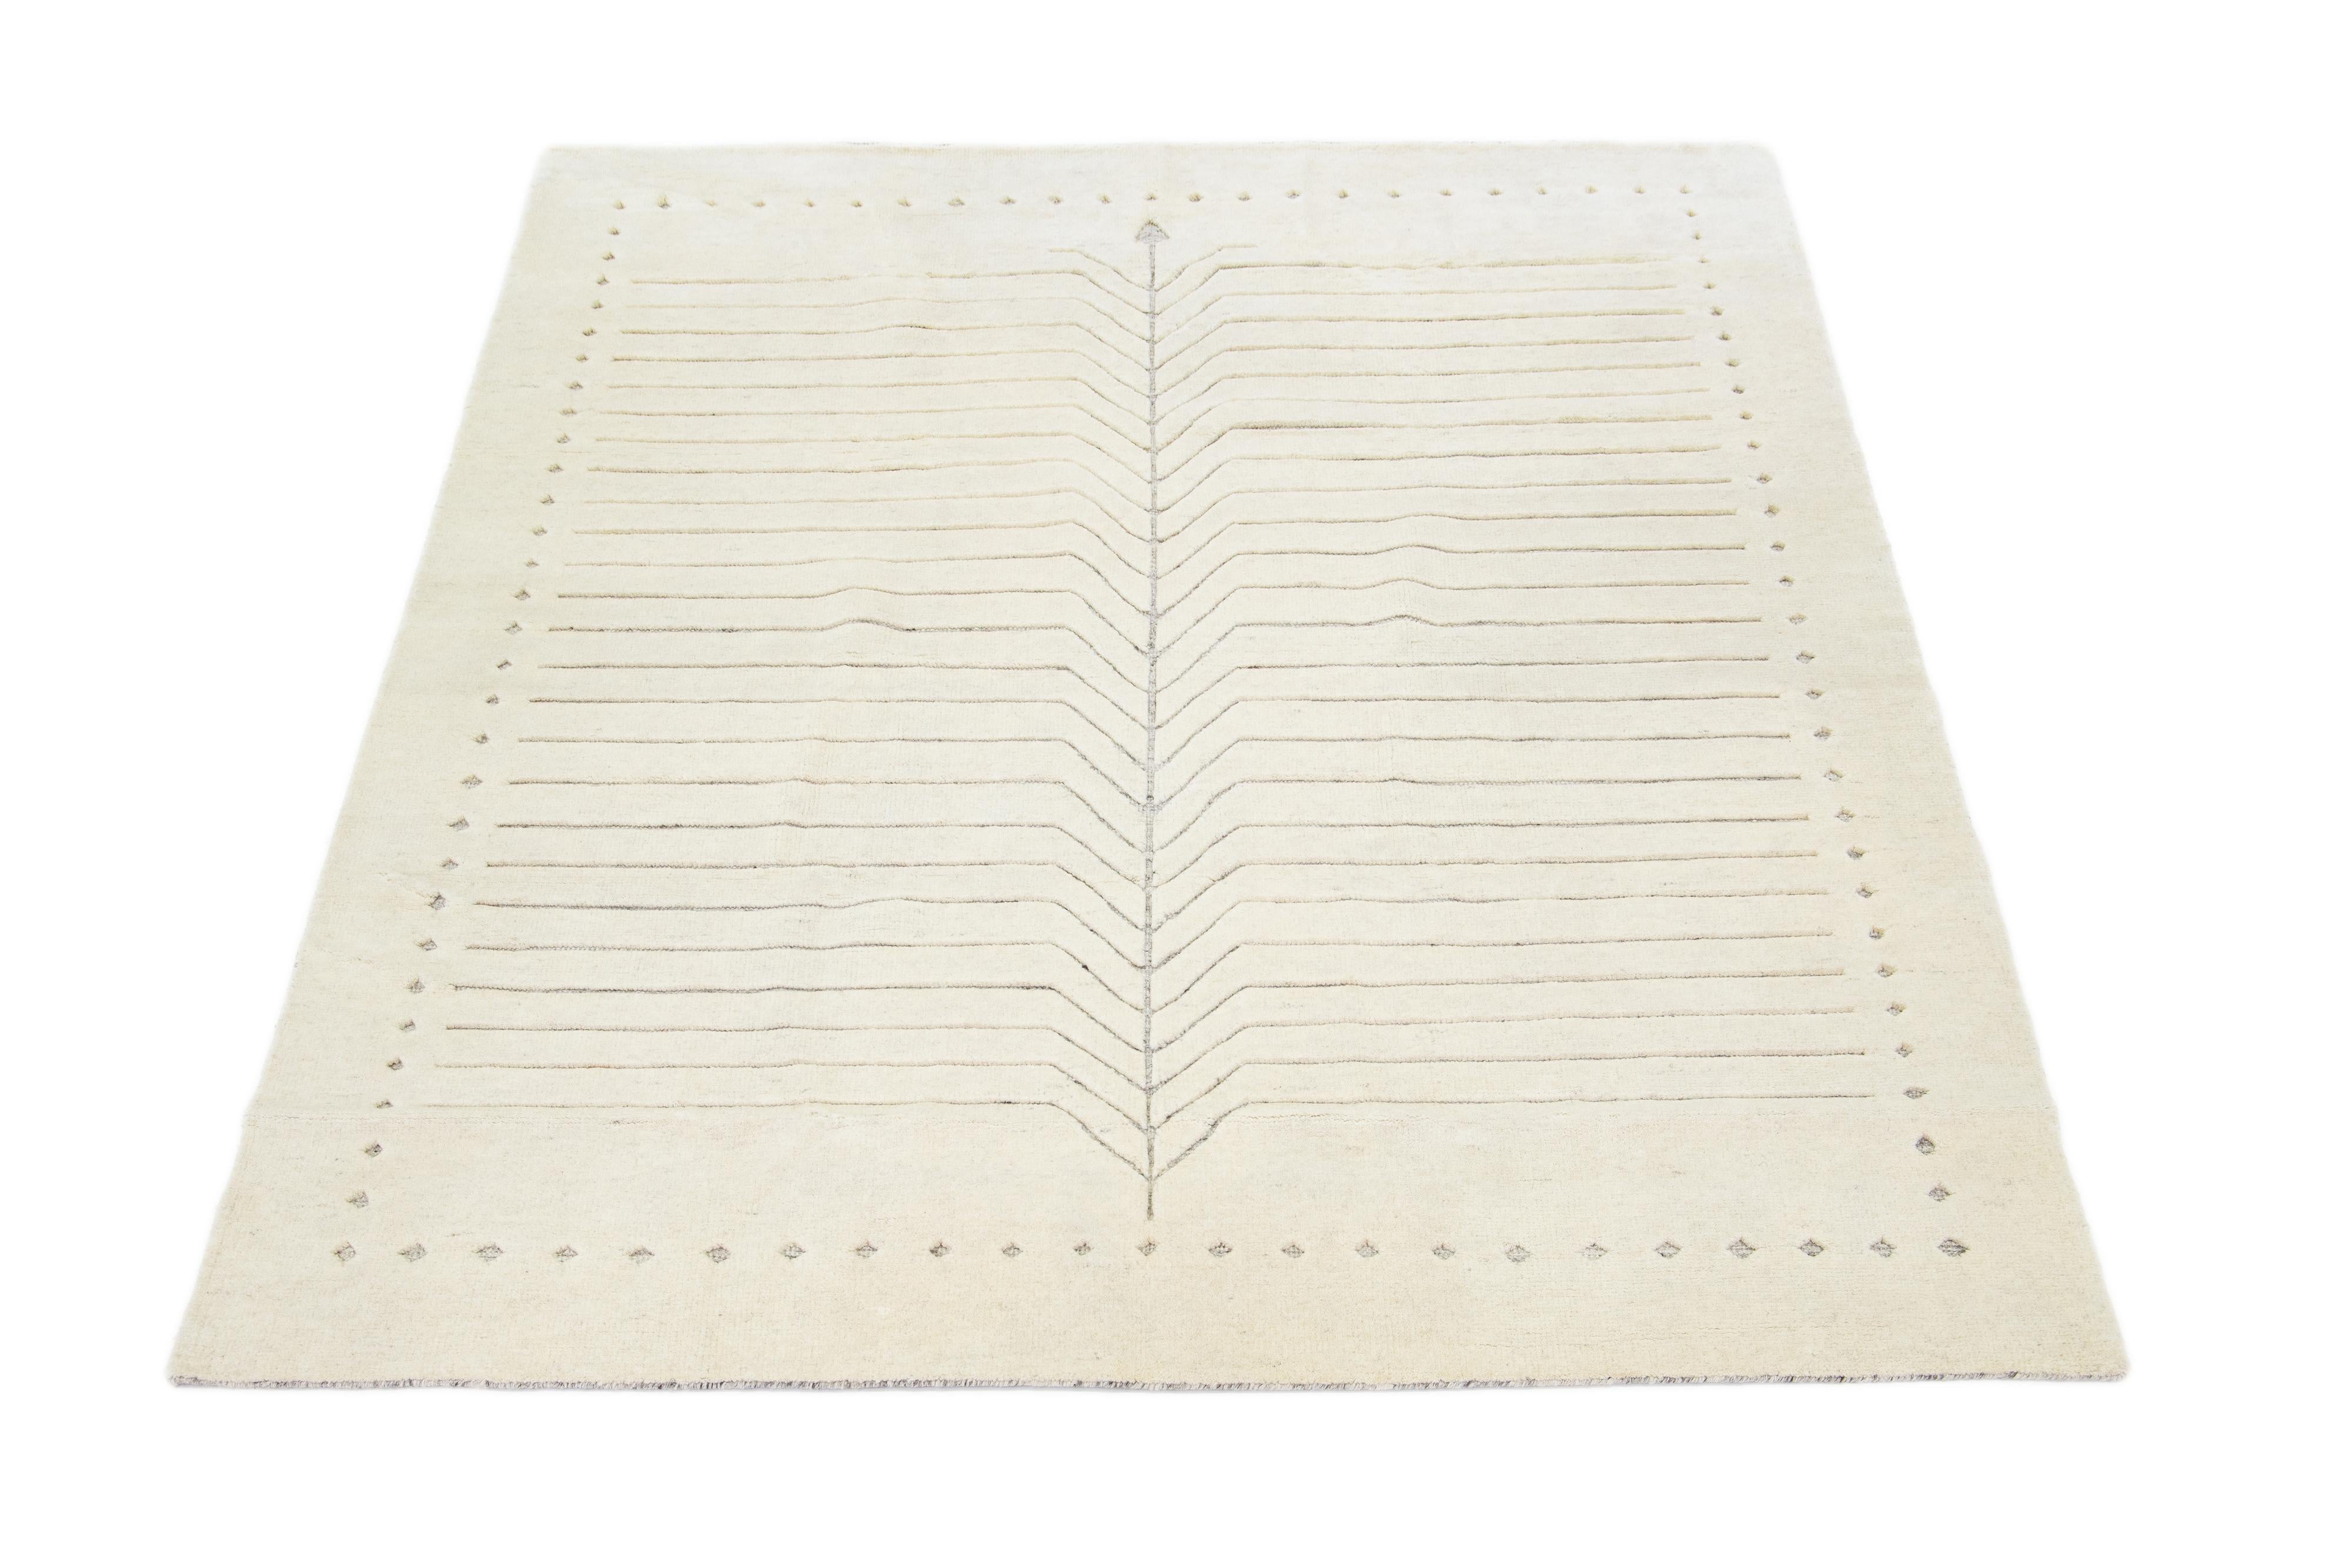 Exquisitely crafted by hand, this modern Moroccan rug features a luxuriously minimalist gray design in the most elegant ivories.

This rug measures 8' x 10'.